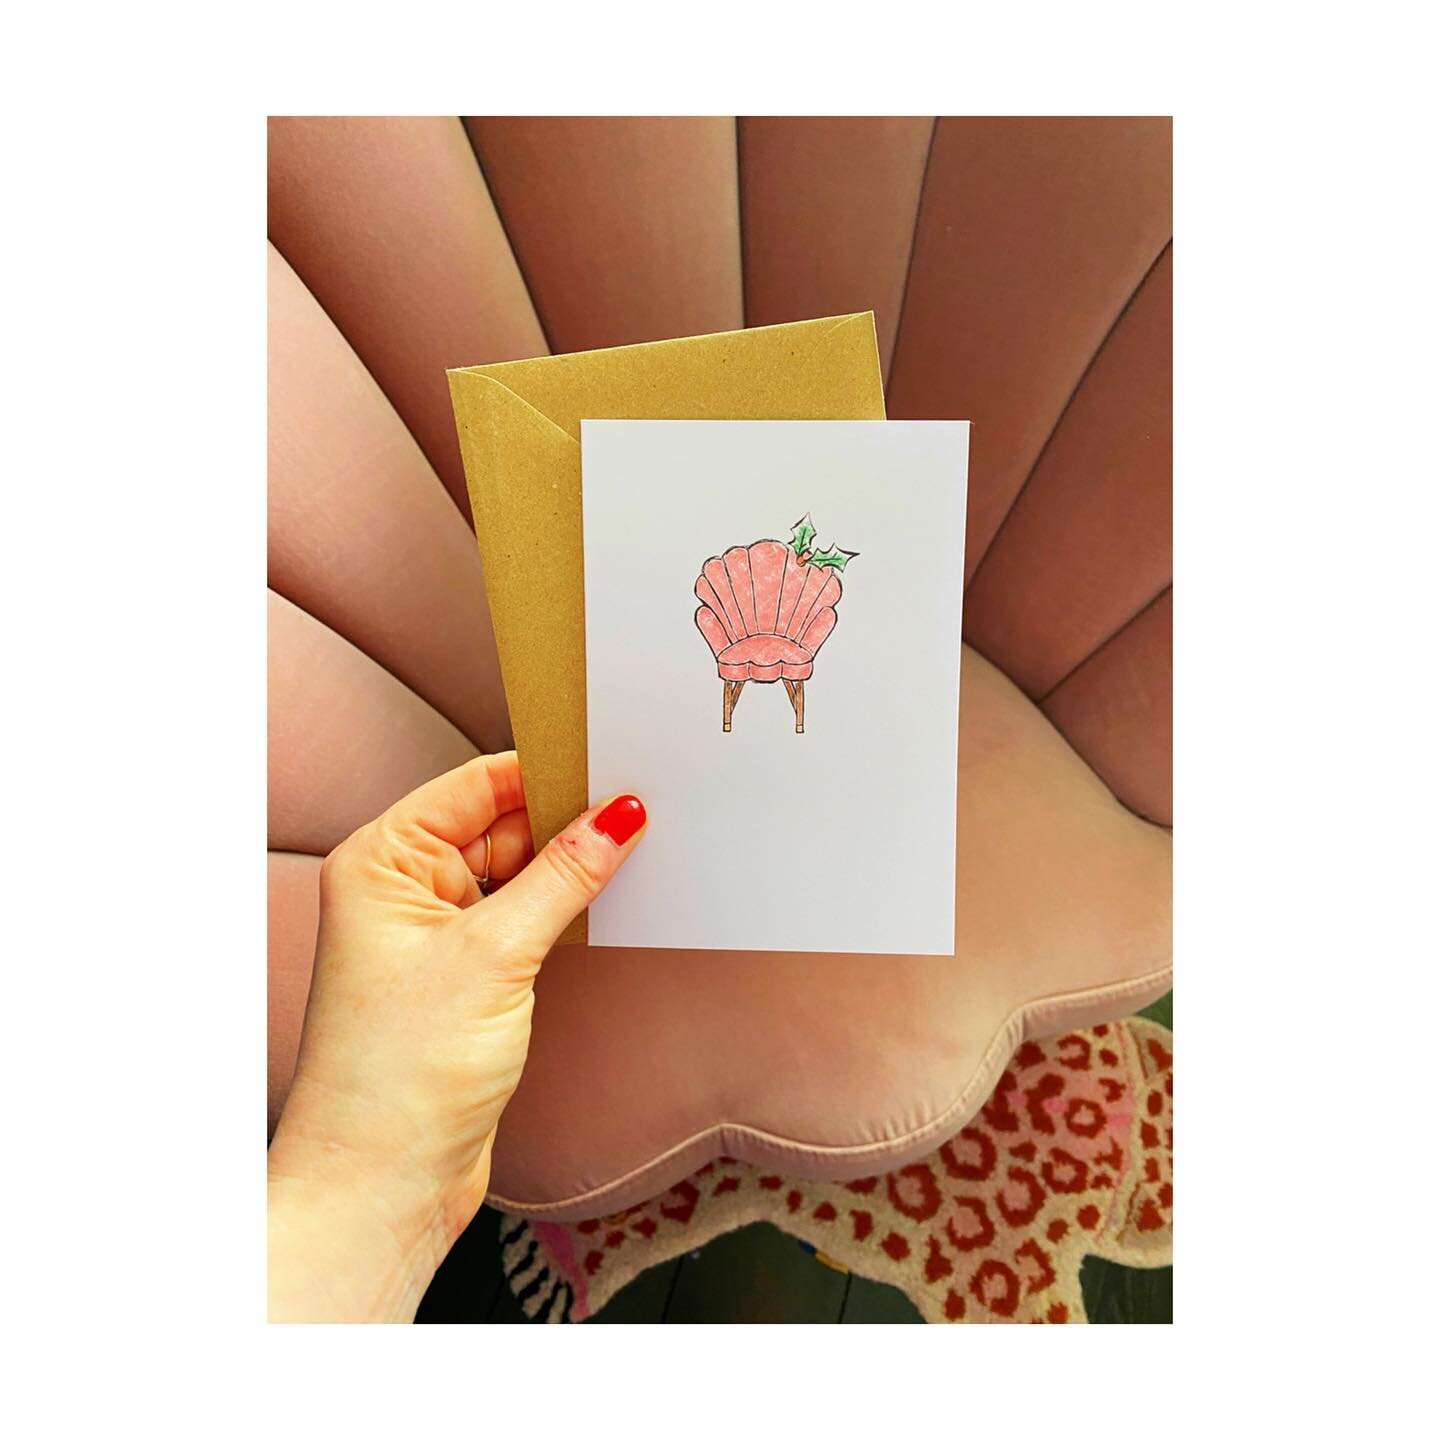 Gorgeous Parlour member Philippa has designed this Christmas card inspired by the @oliverbonas pink Parlour chair with 25p going to @mindcharity, a cause very close to both our hearts 💕 WELL BABES! The gorgeous people at OB have now said if we can s